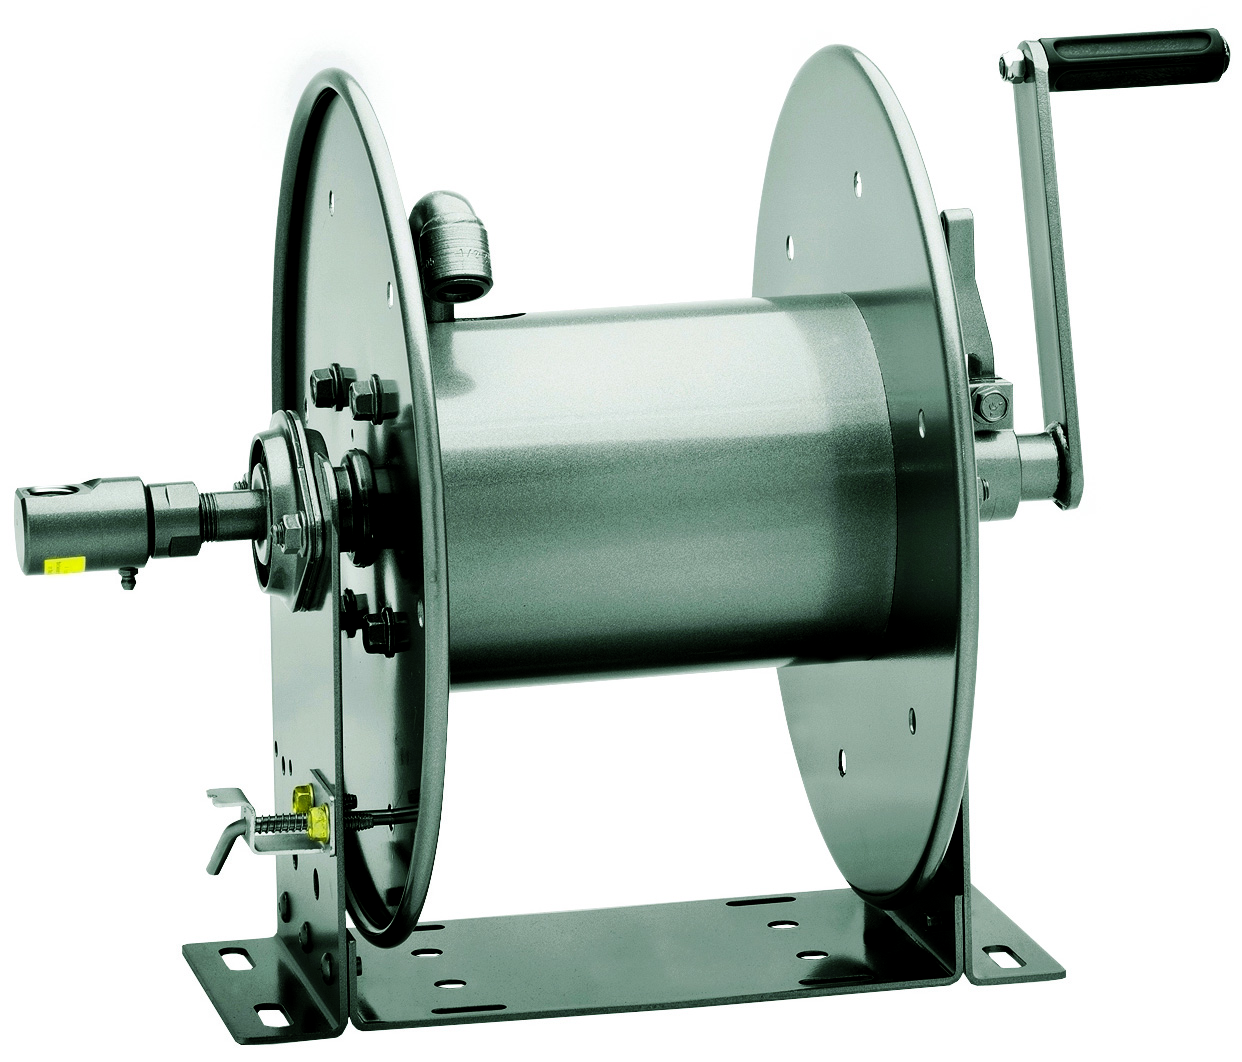 Hannay Sewer and Waste Hose Reels